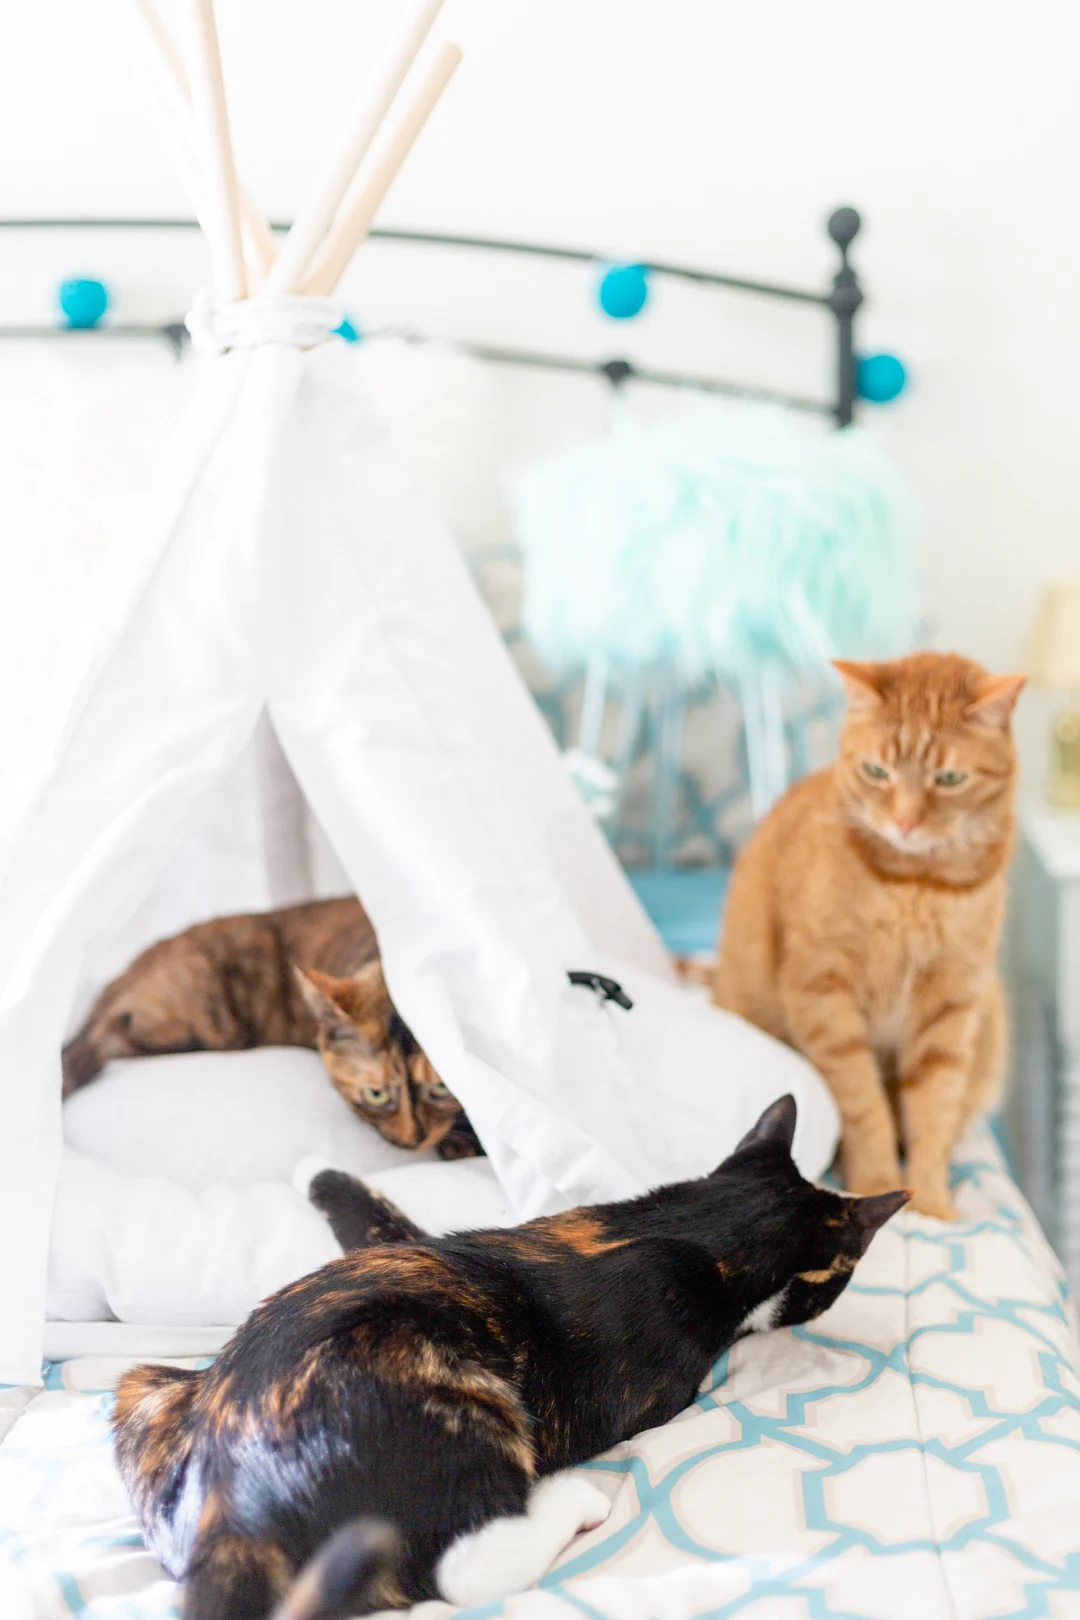 See how I learned to bond with my new adopted kitties.